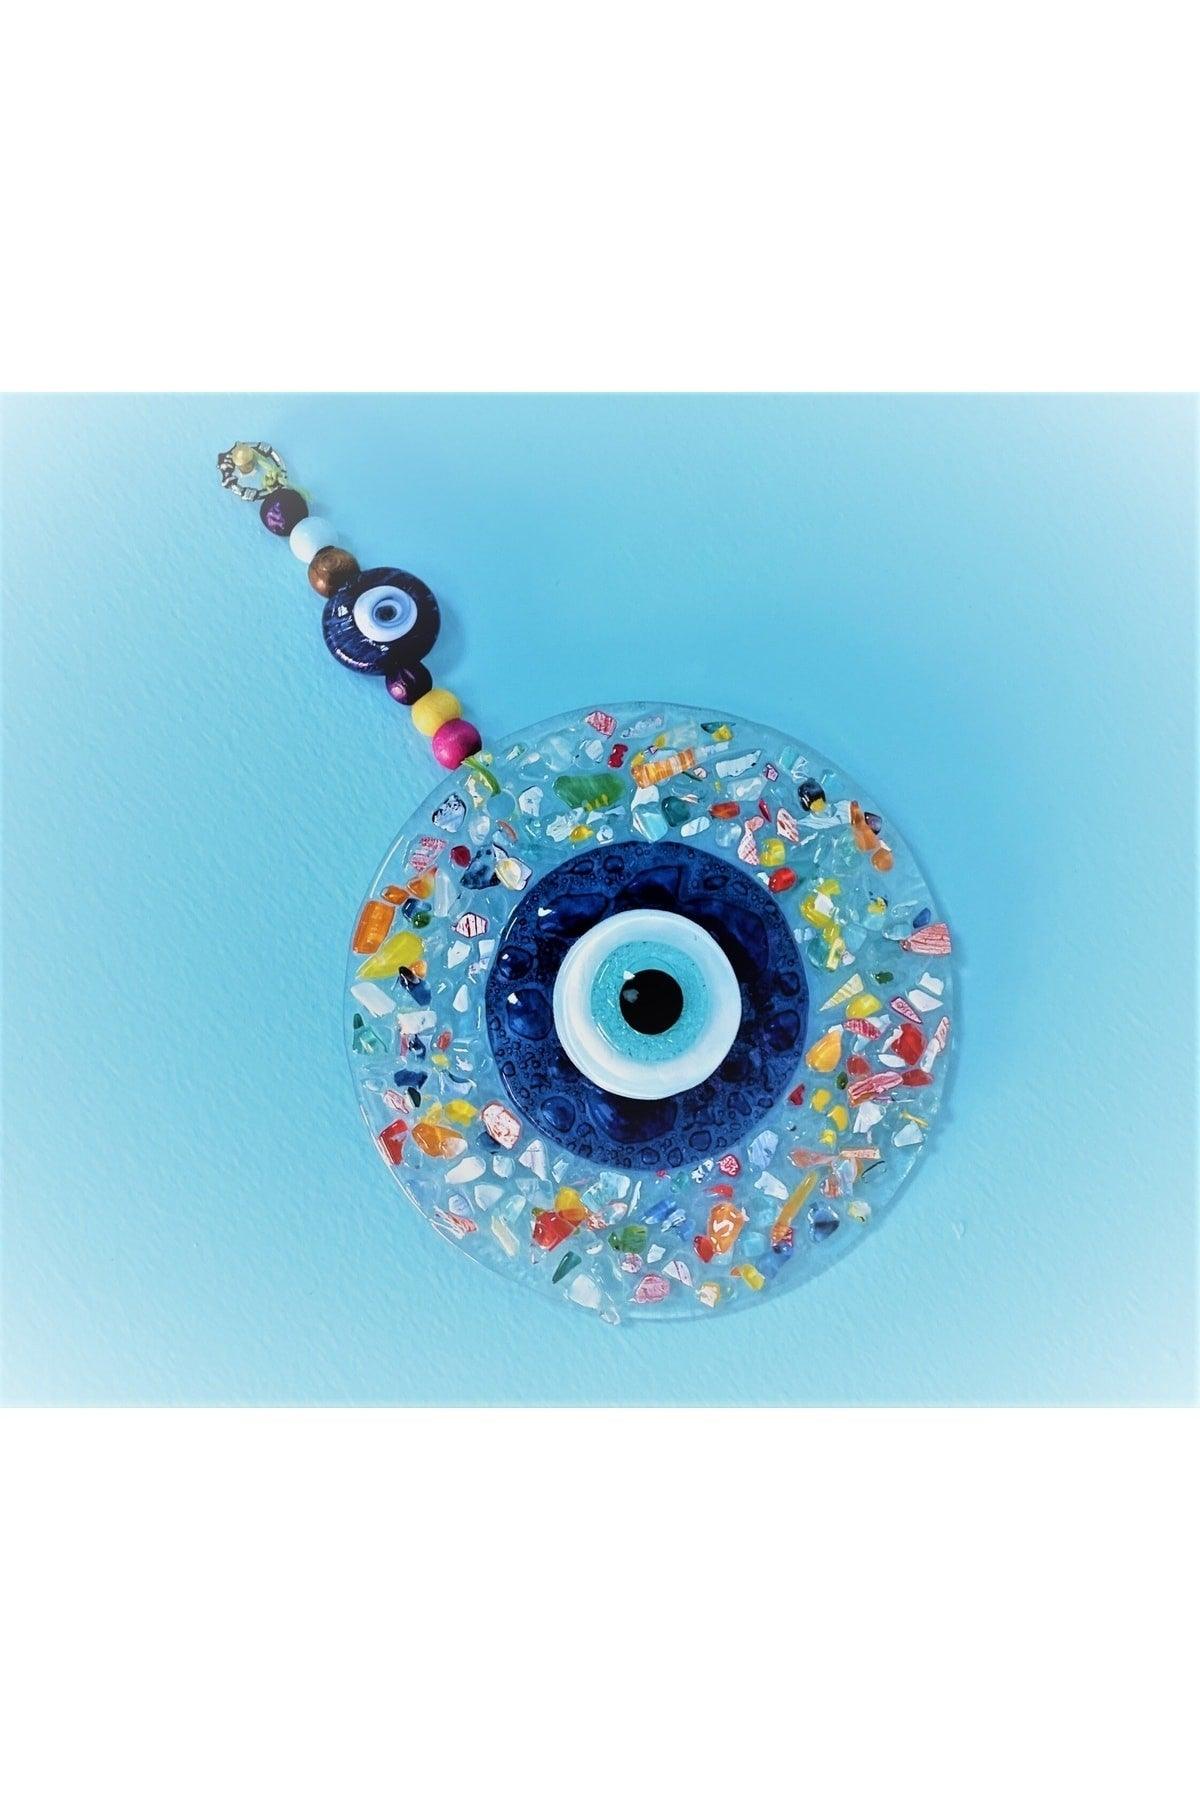 Blue Evil Eye Beads Cut Colored Glass Patterned Wall Ornament Charms - Swordslife